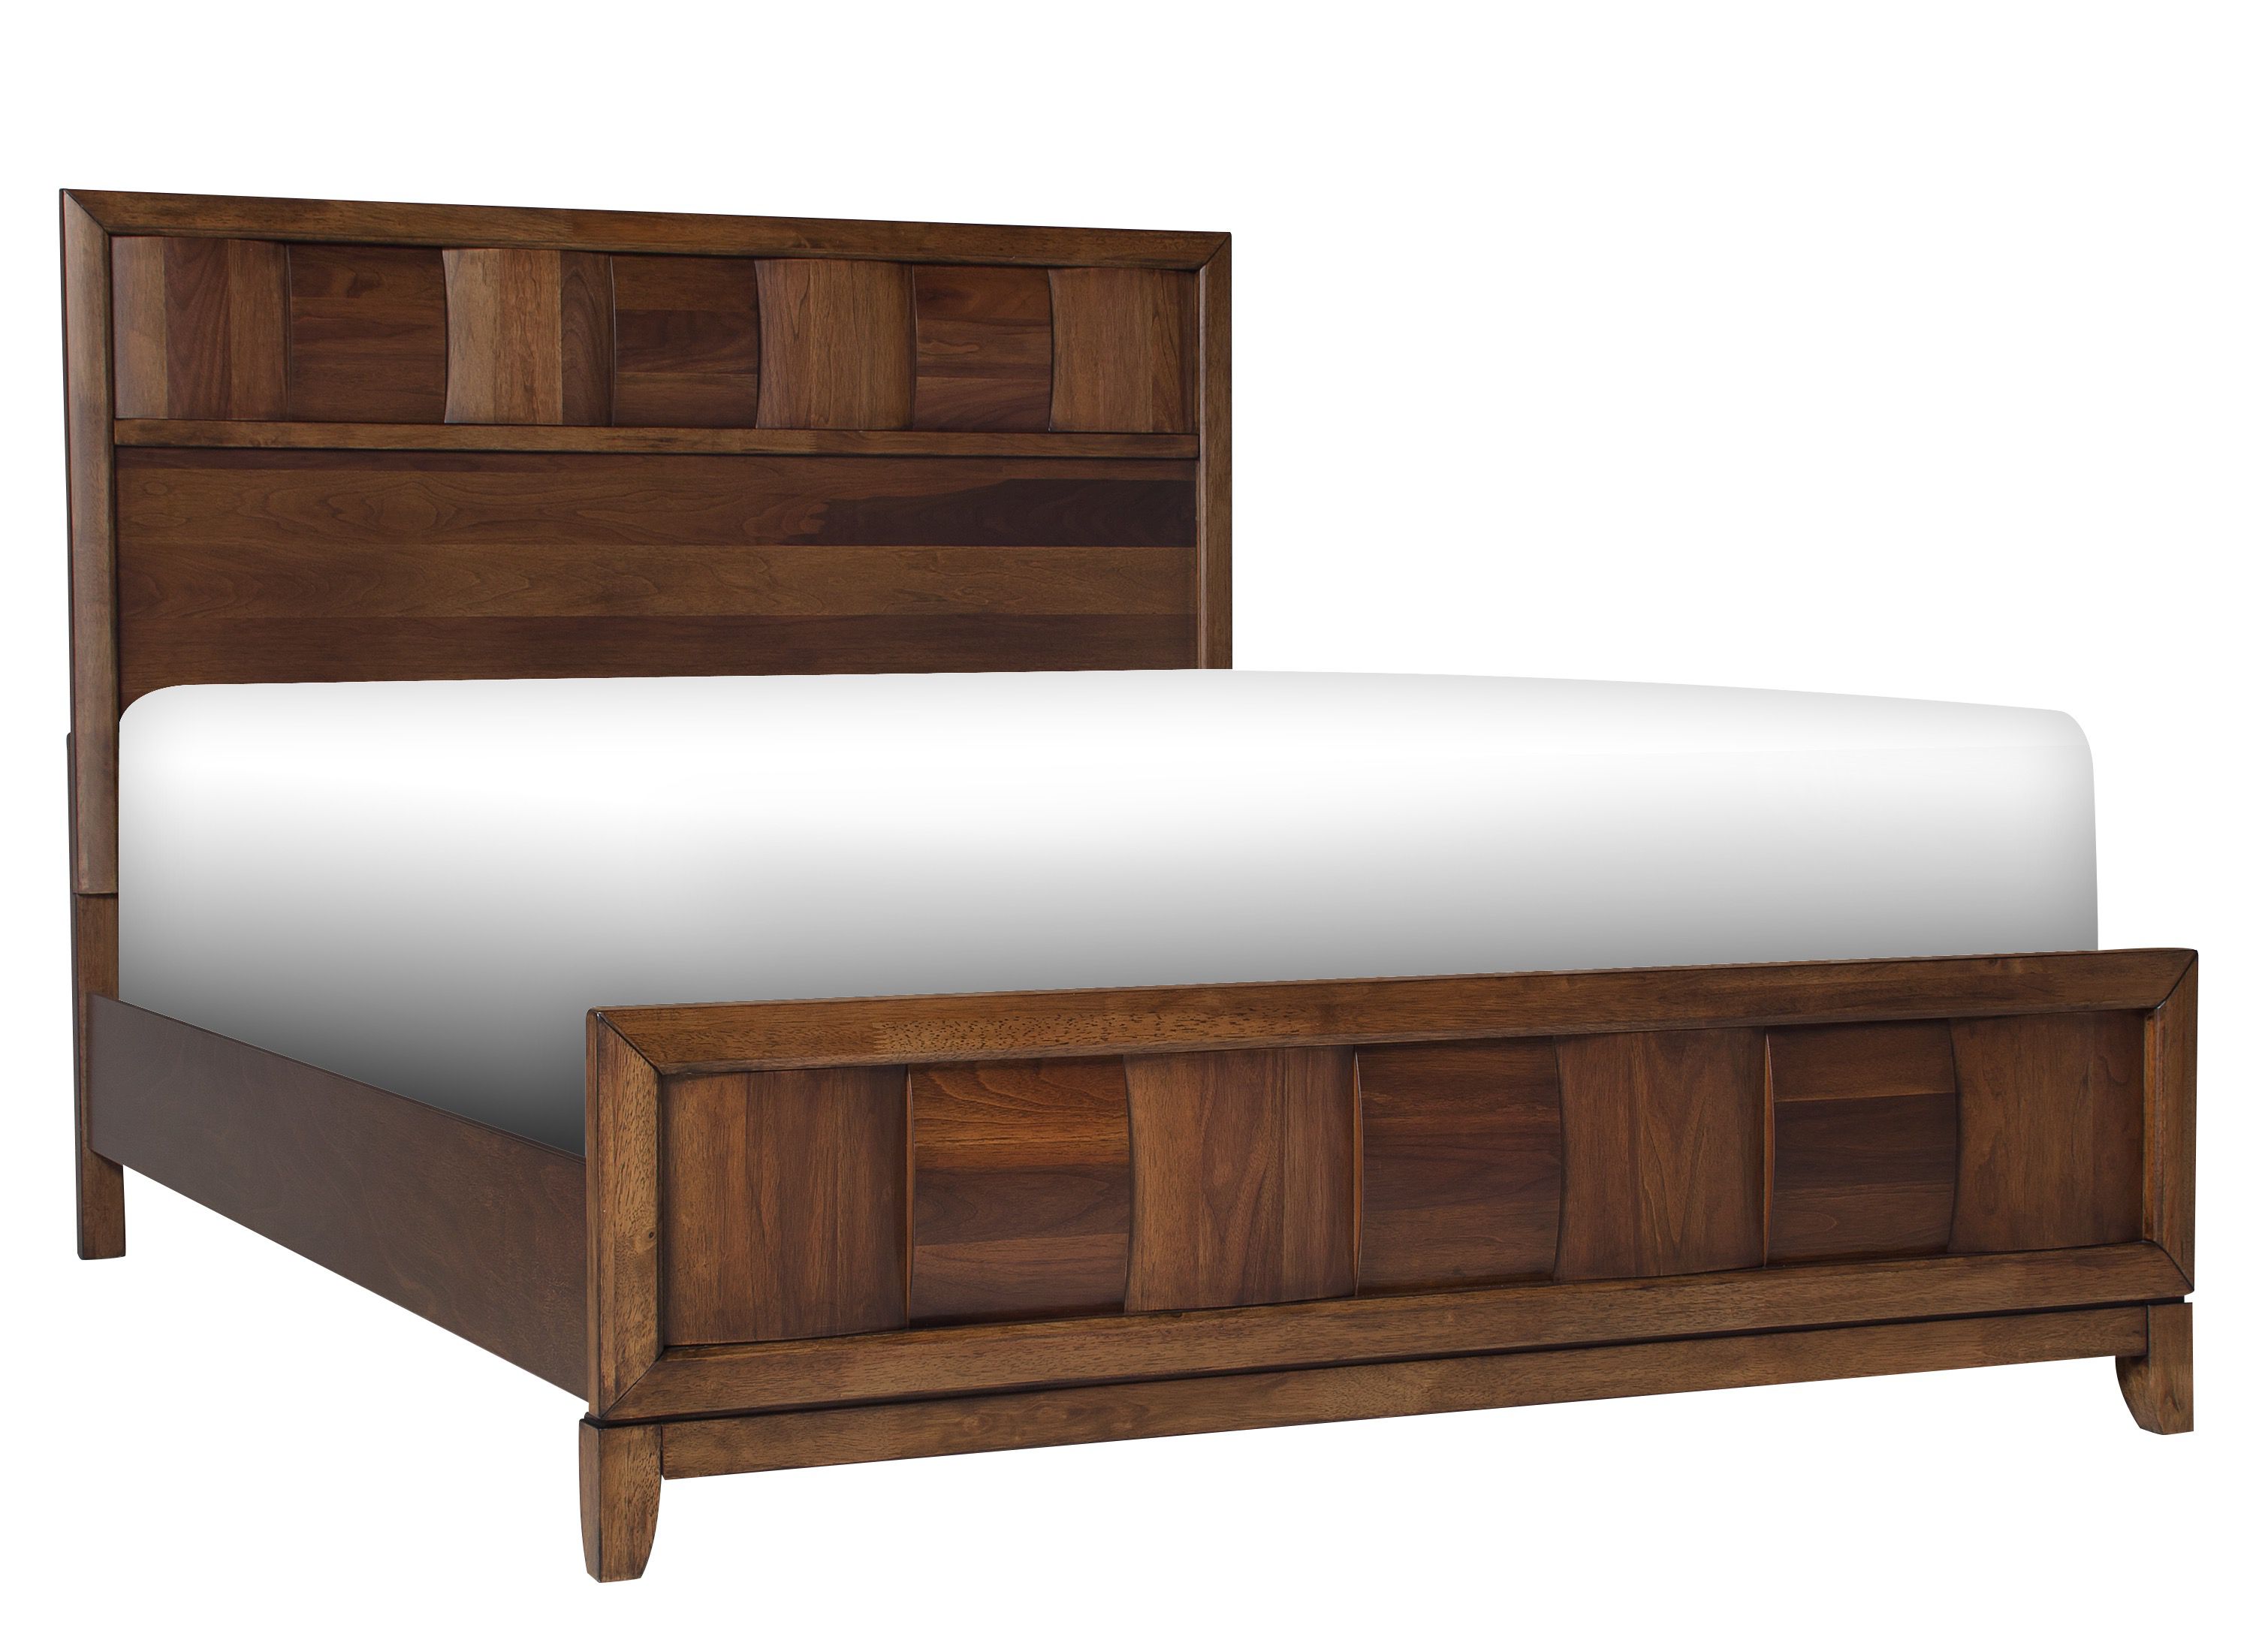 Jovie Platform Bed Raymour Flanigan, Raymour And Flanigan Wood Bed Frames